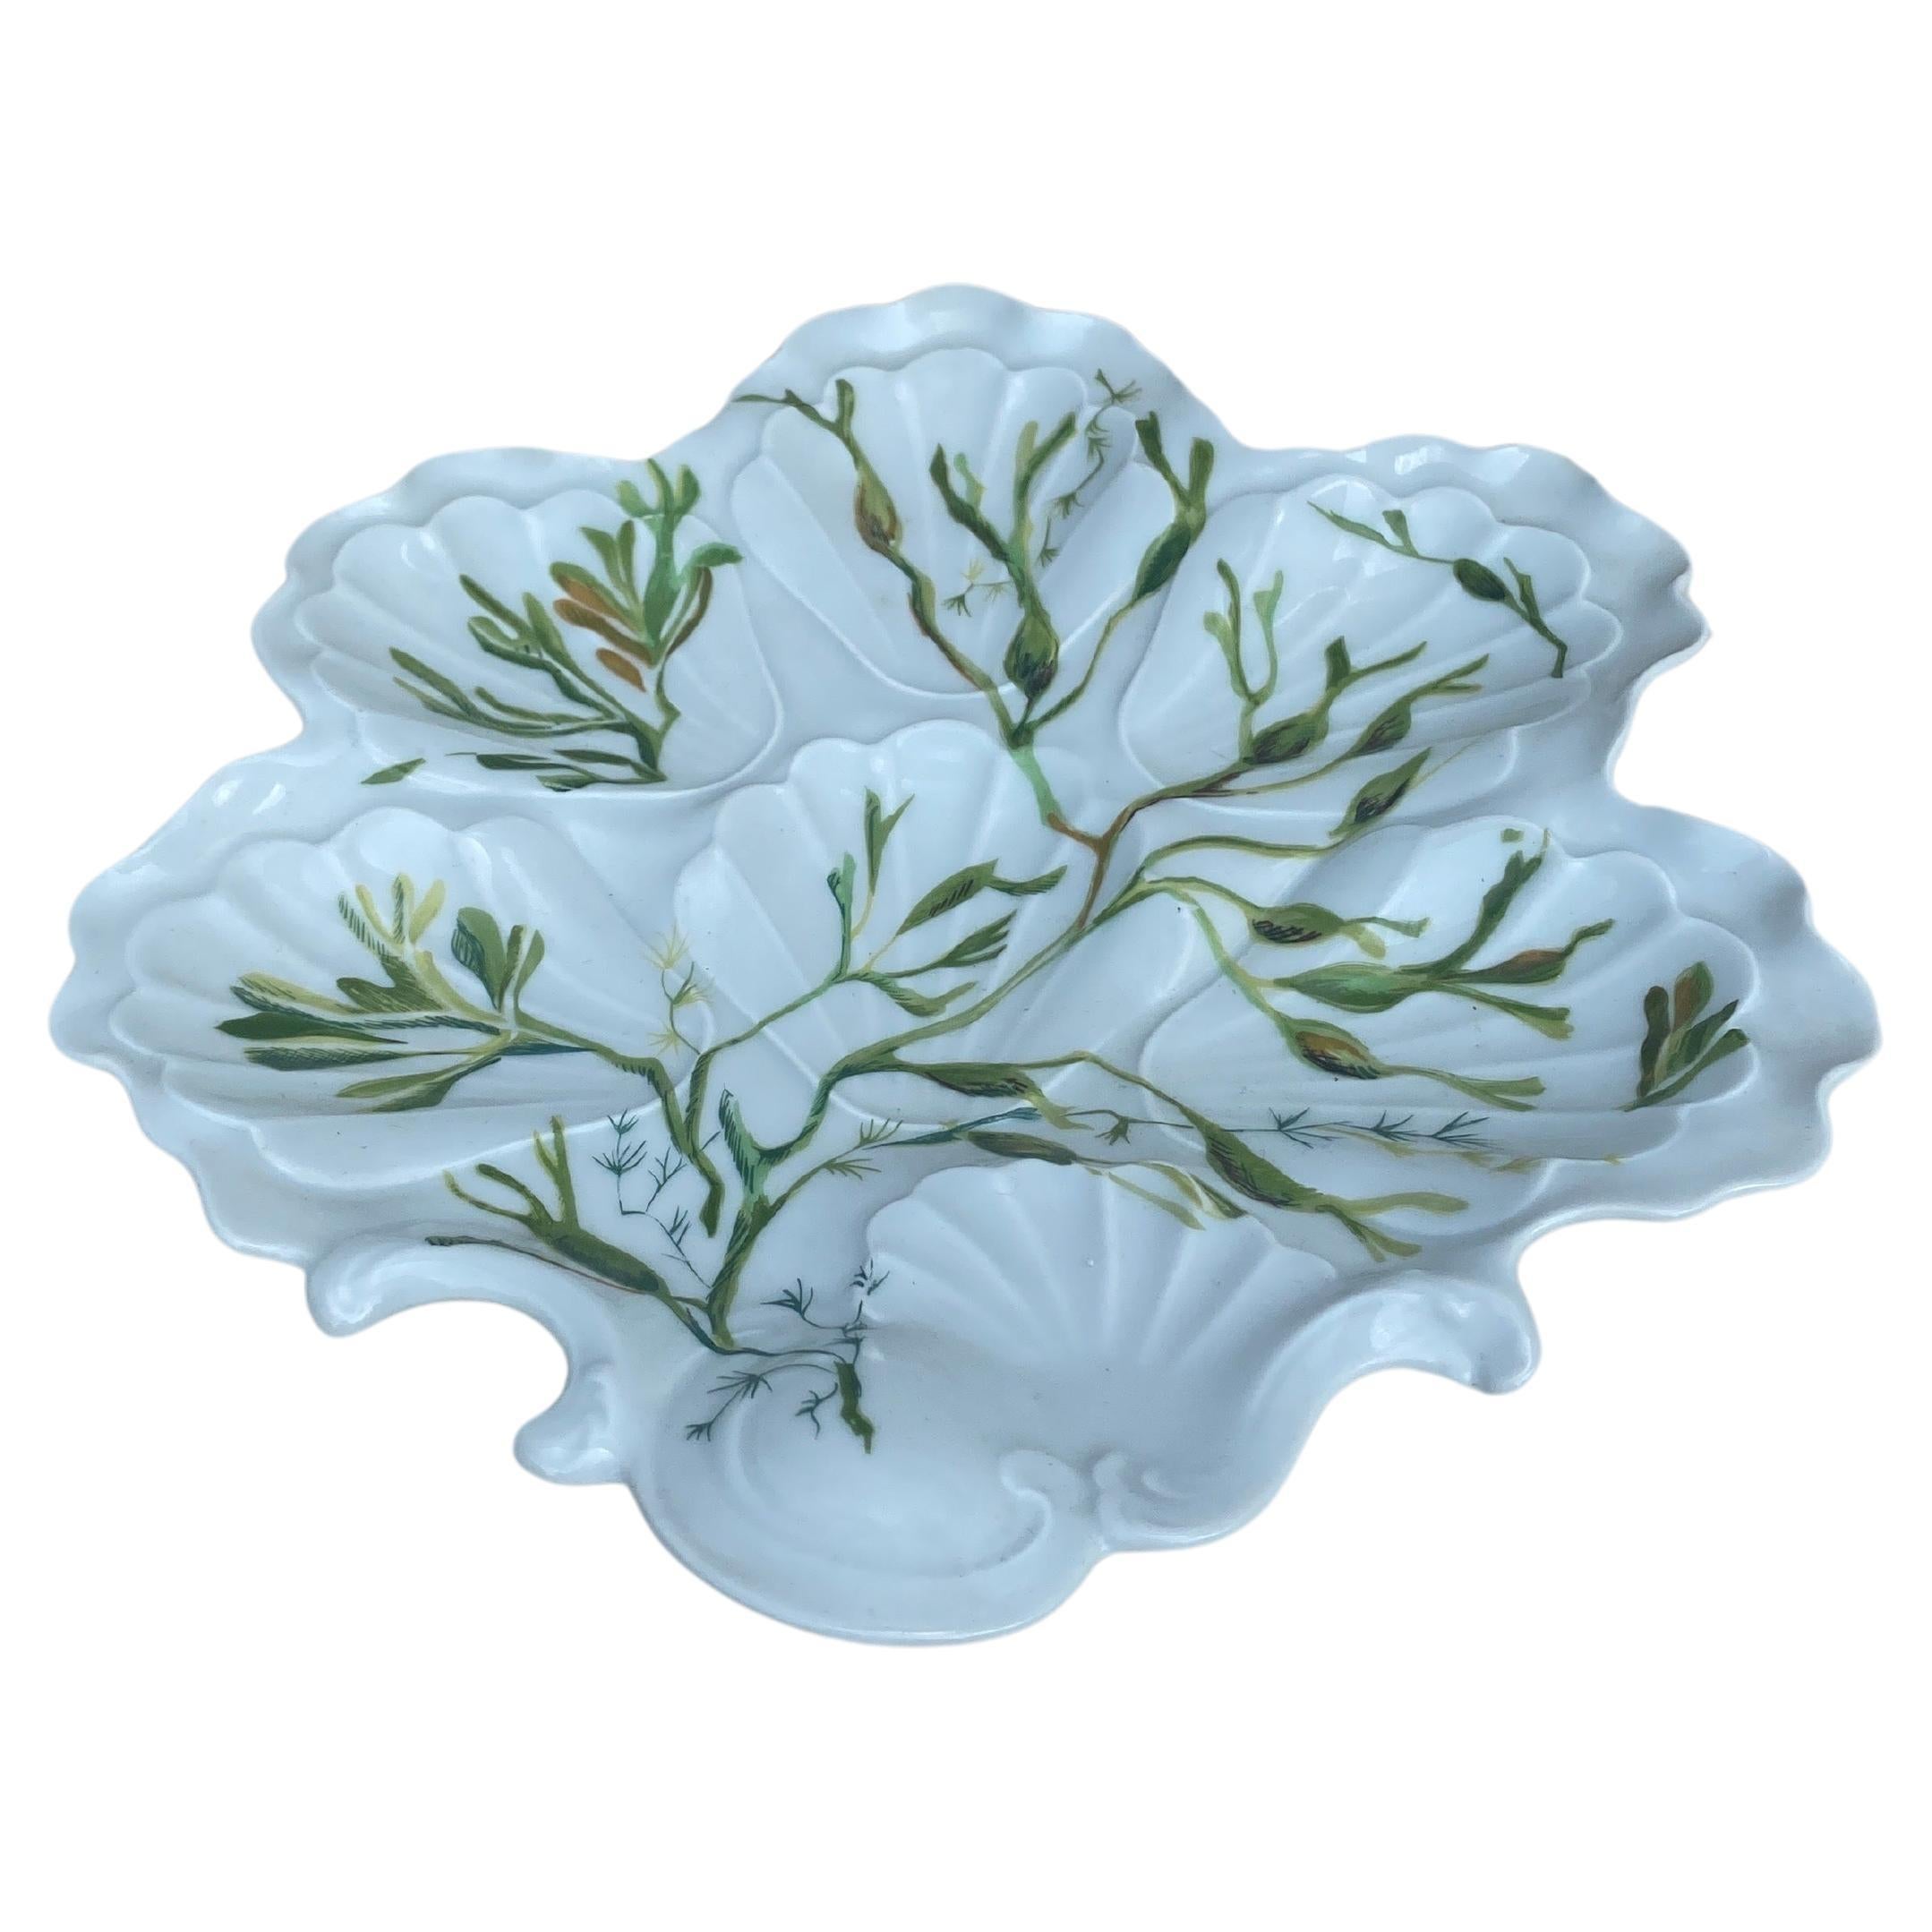 Aesthetic Movement Porcelain Oyster Plate with Seaweeds Limoges, circa 1900 For Sale